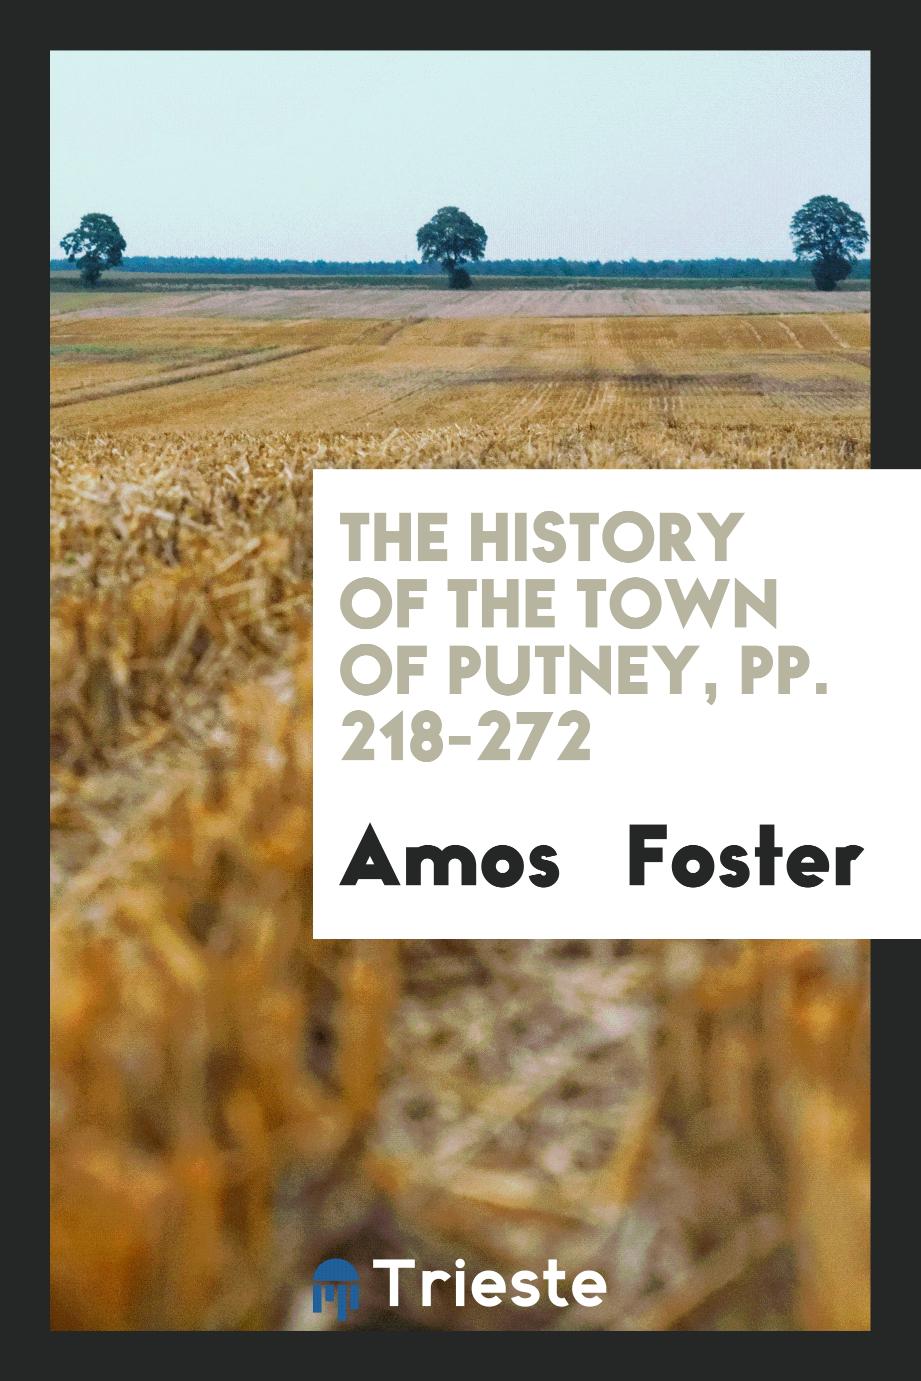 The History of the Town of Putney, pp. 218-272